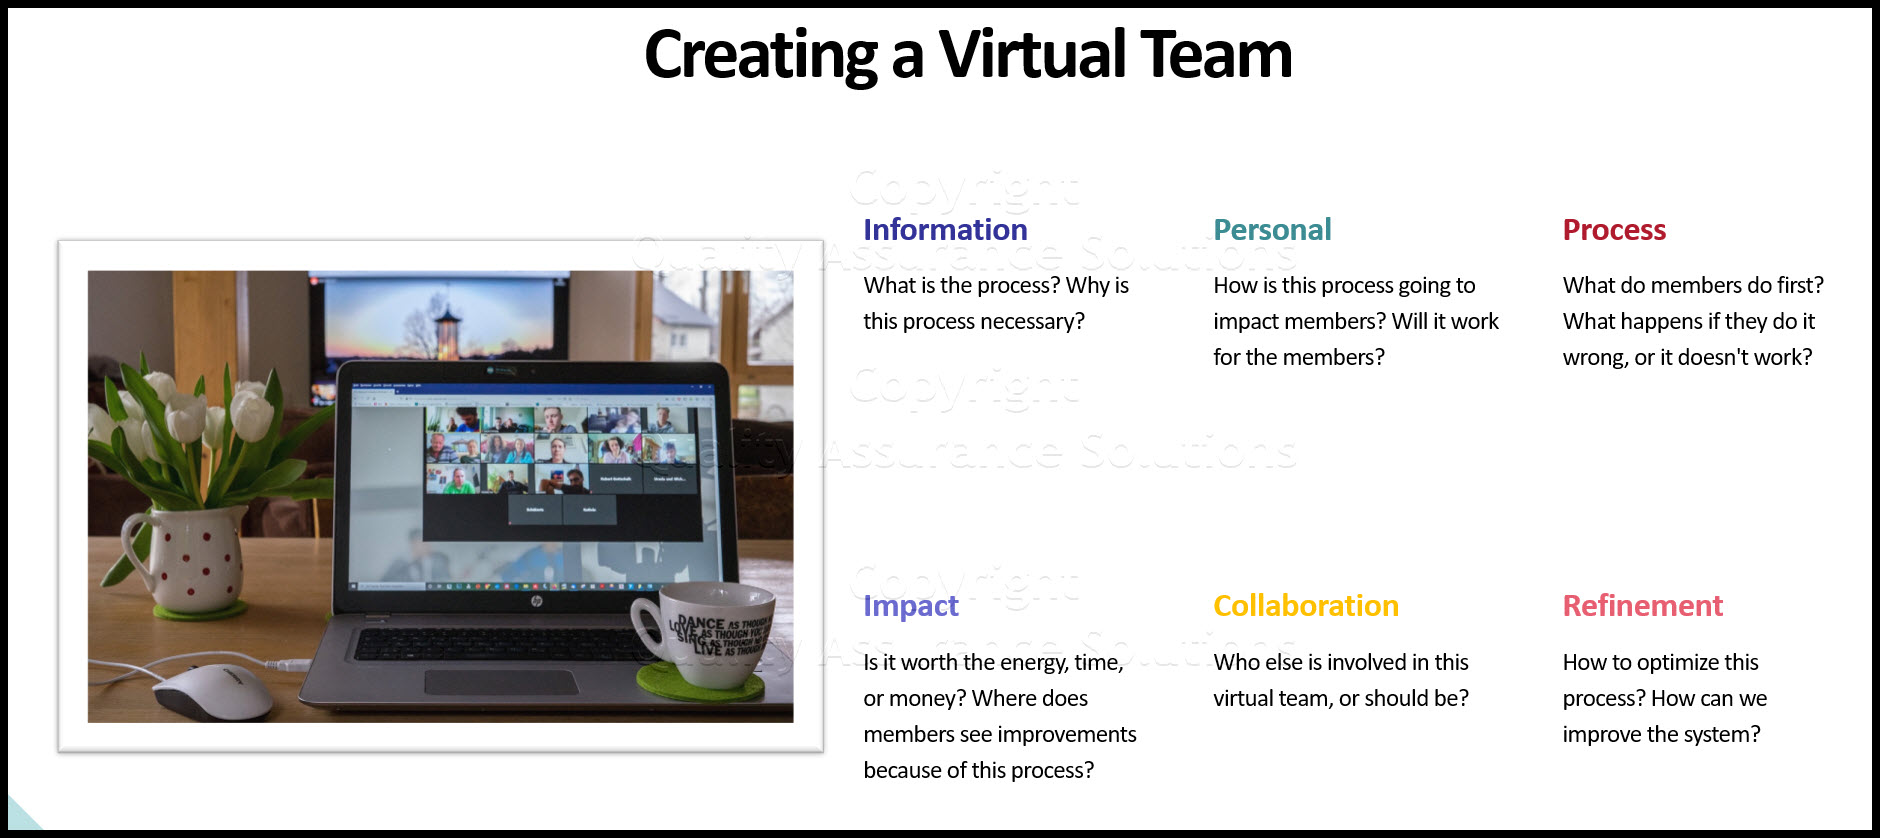 Virtual team building is the future of business. The tools to compete in an expanding global marketplace.